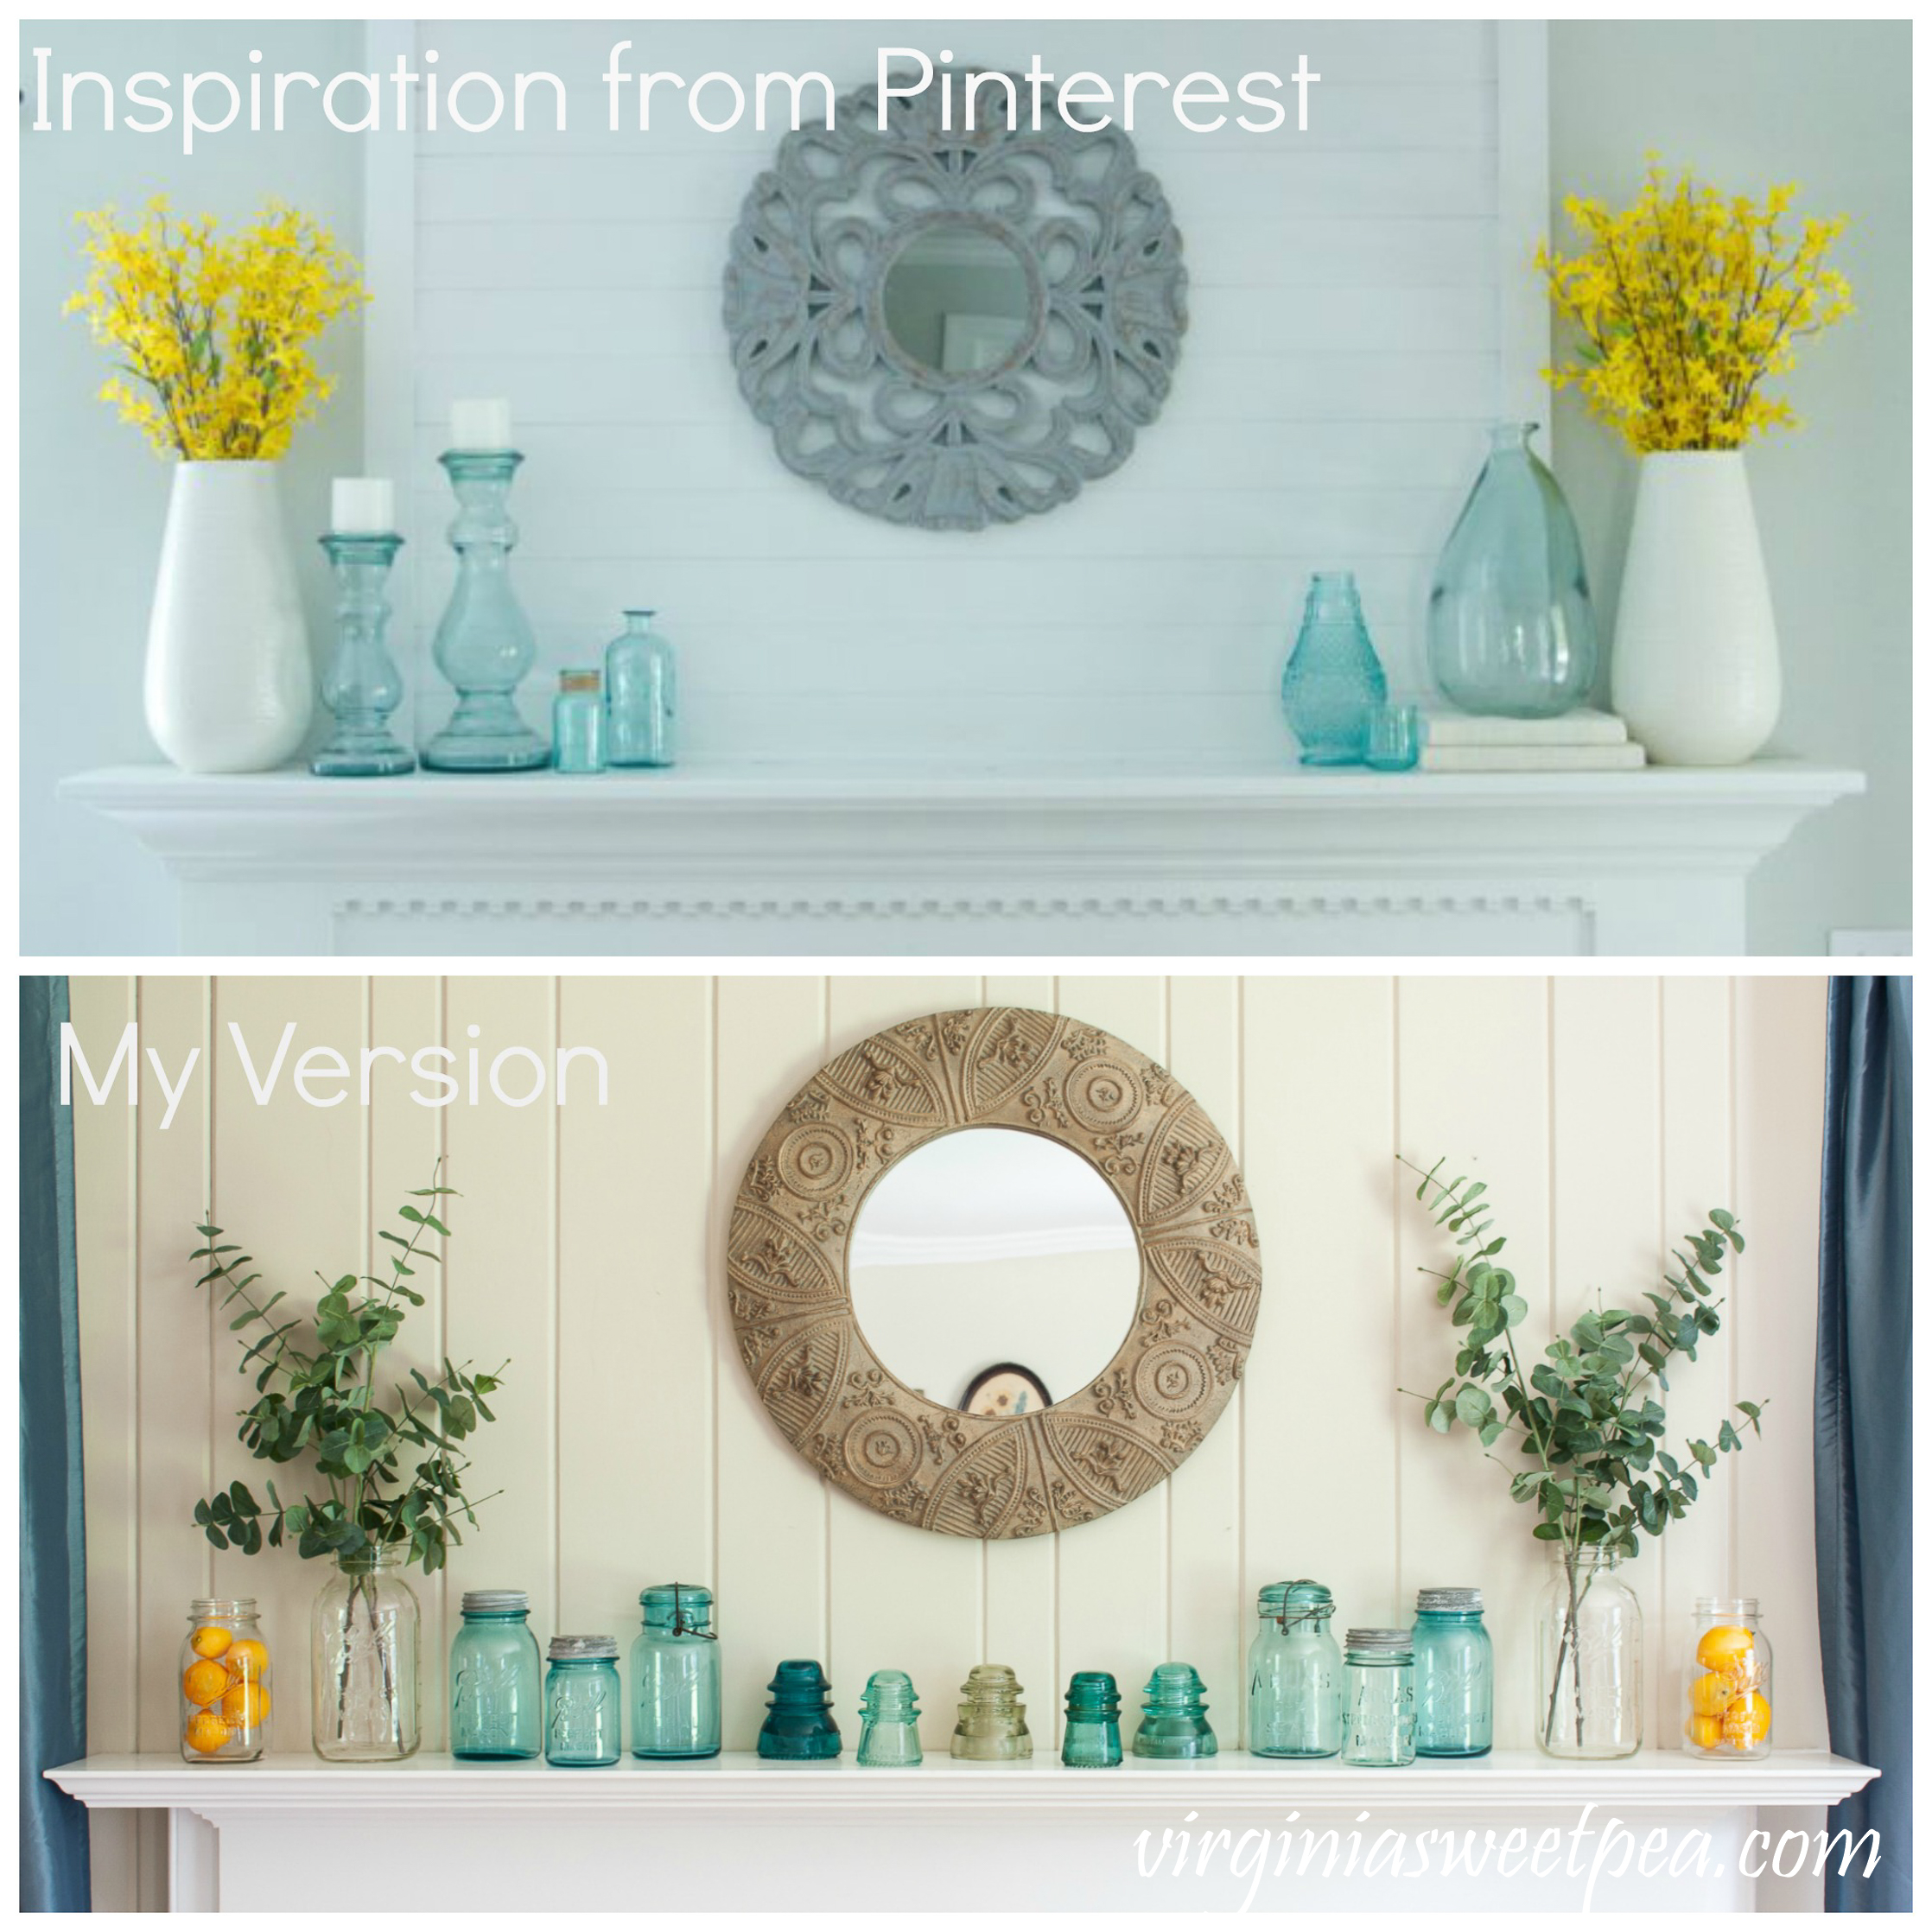 How to use a mantel idea found on Pinterest in your own home.